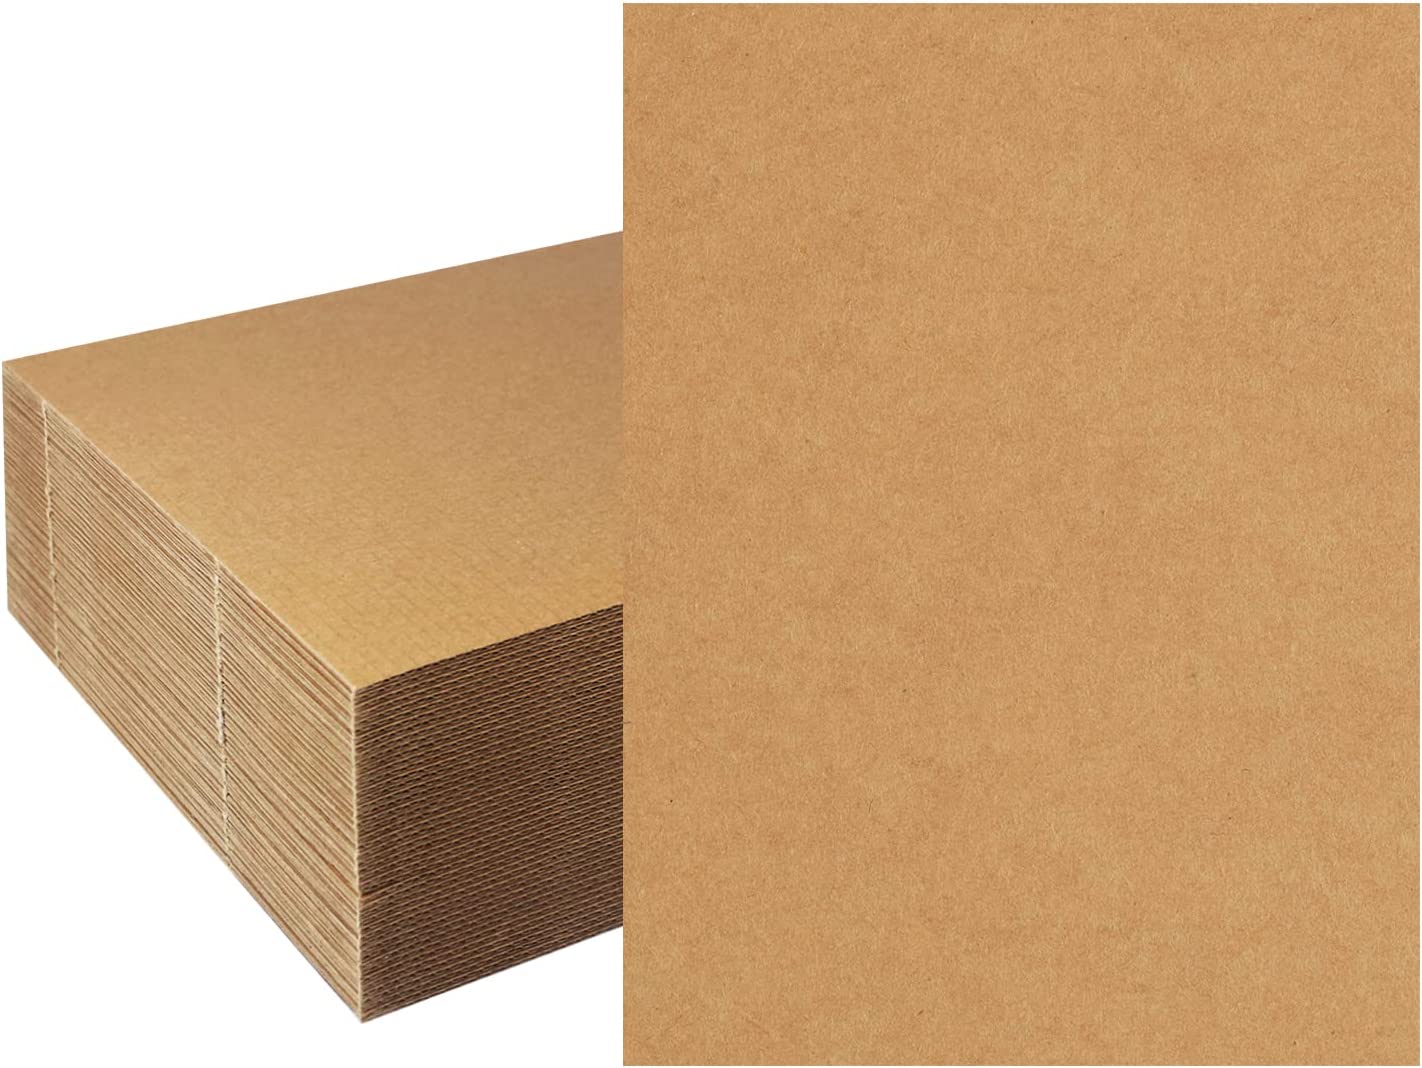 Golden State Art, 50 Pack 12x12 One-side White Corrugated Cardboard Sheets,  Flat Cardboard Inserts Layer Pads for Mailing, Packaging or Art Crafts  photo backing (1/8 Thick) 